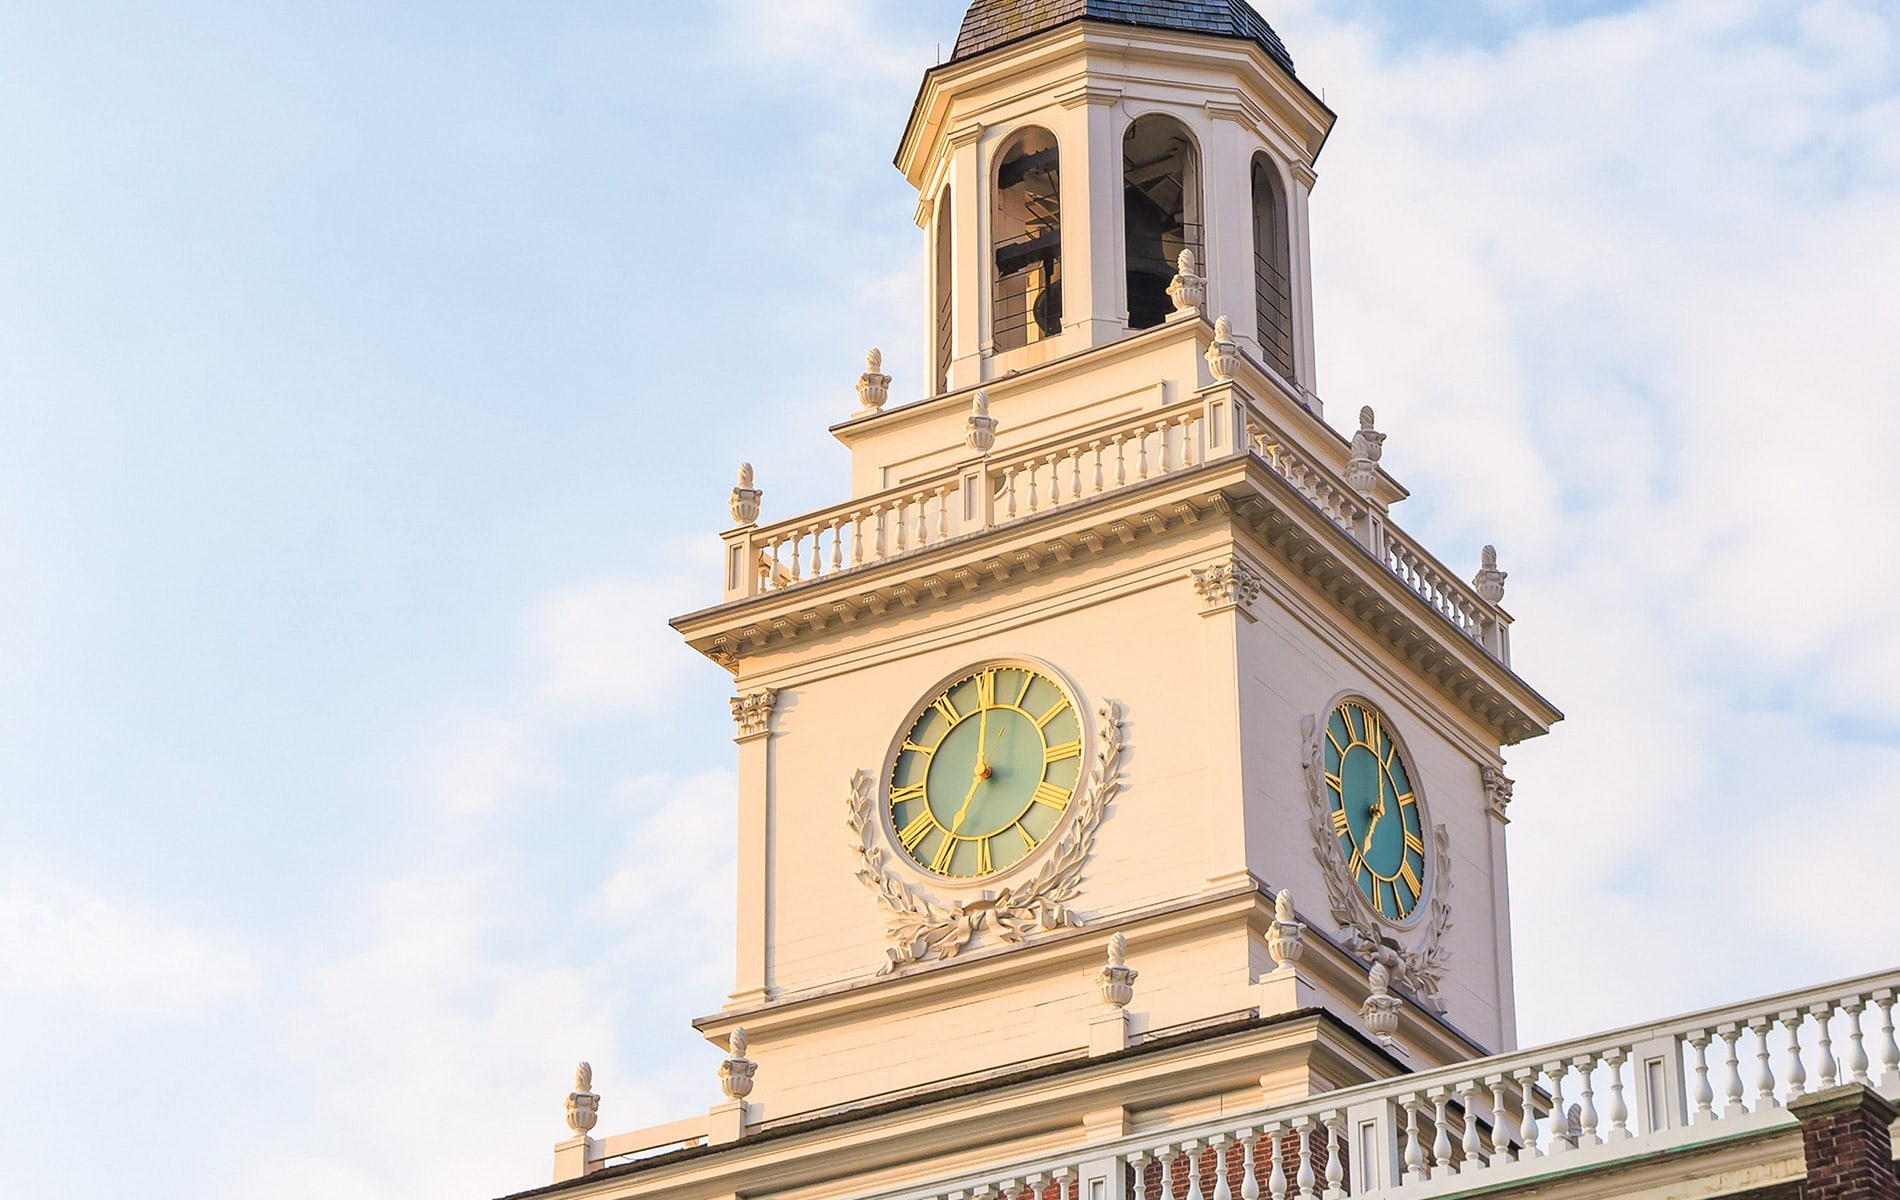 Centennial tower clock for Independence Hall in Philadelphia